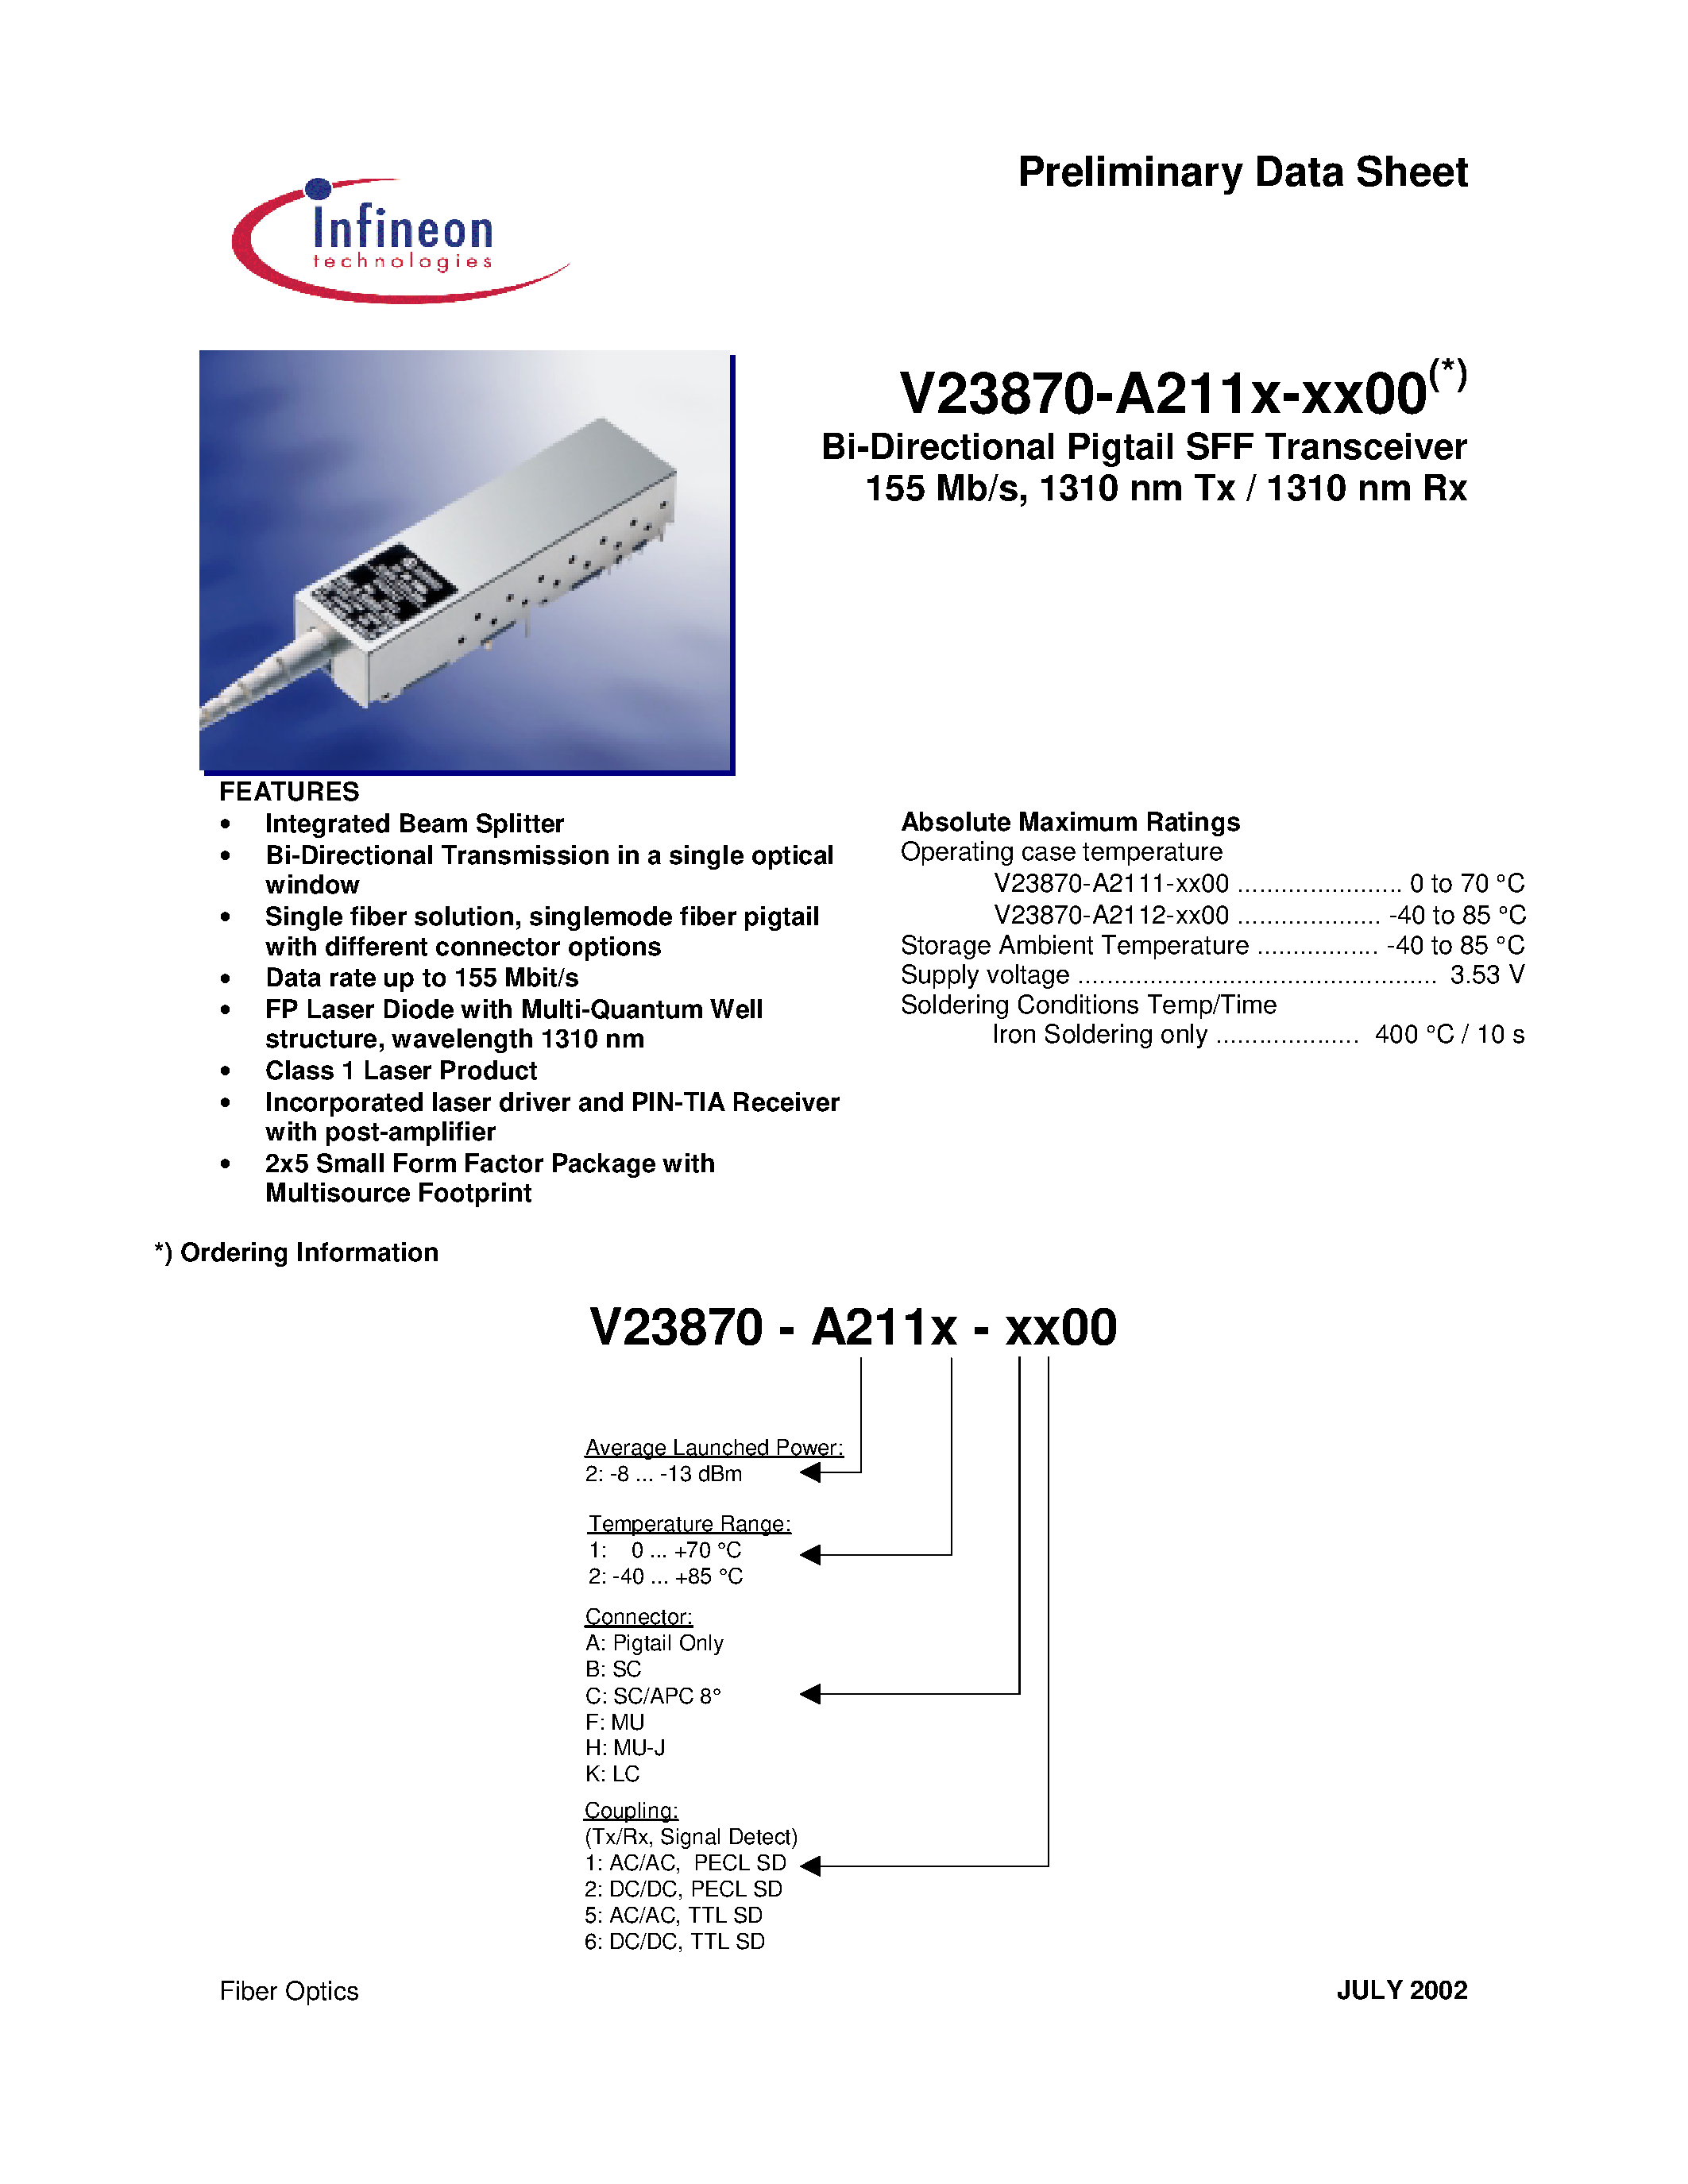 Datasheet V23870-A2111-F500 - Bi-Directional Pigtail SFF Transceiver 155 Mb/s/ 1310 nm Tx / 1310 nm Rx page 1